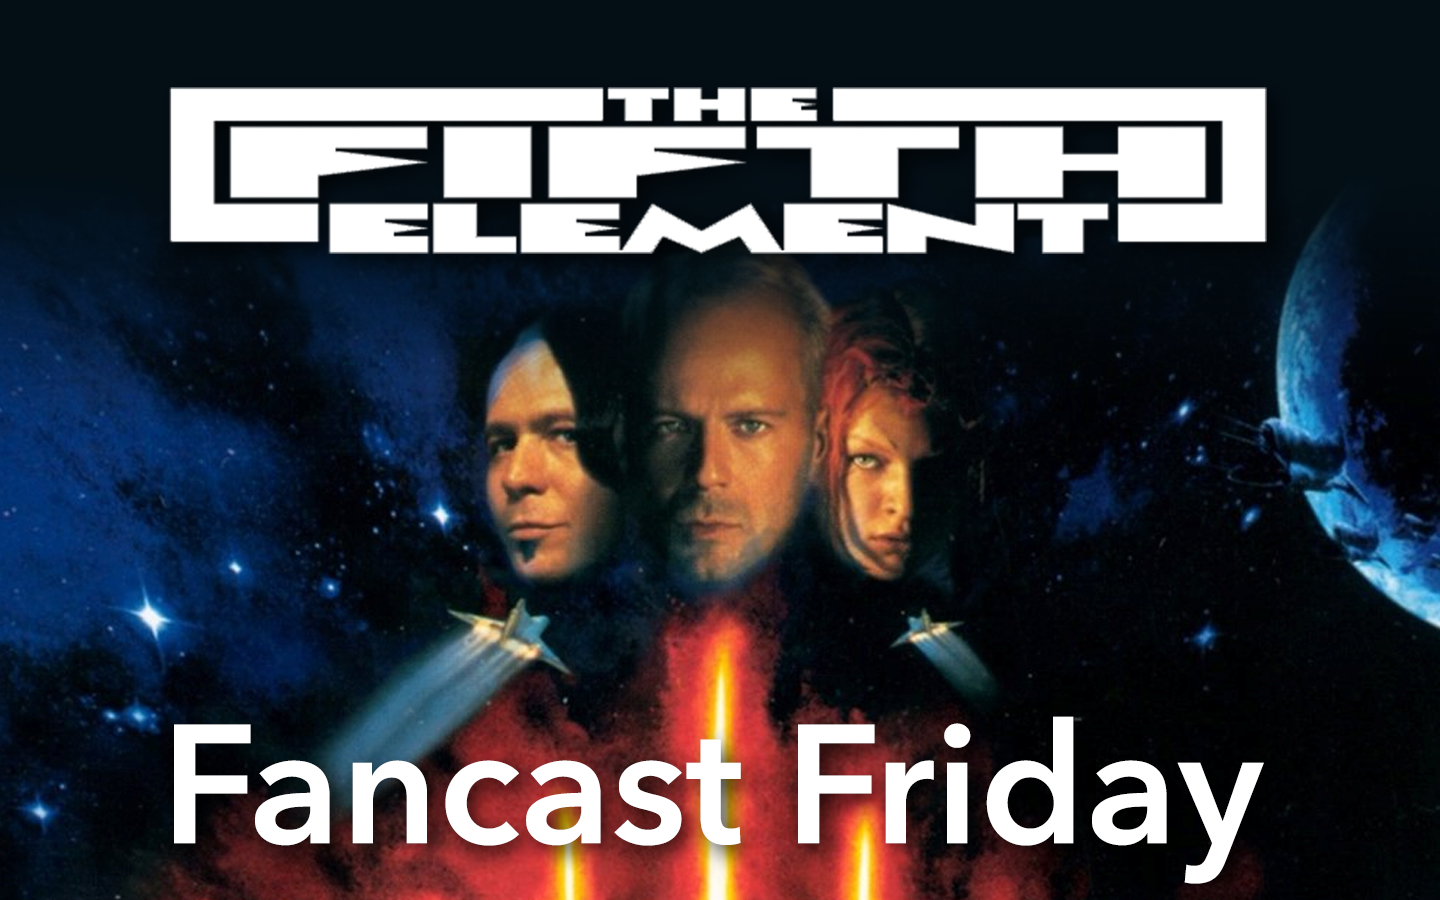 #FancastFriday ‘The Fifth Element’